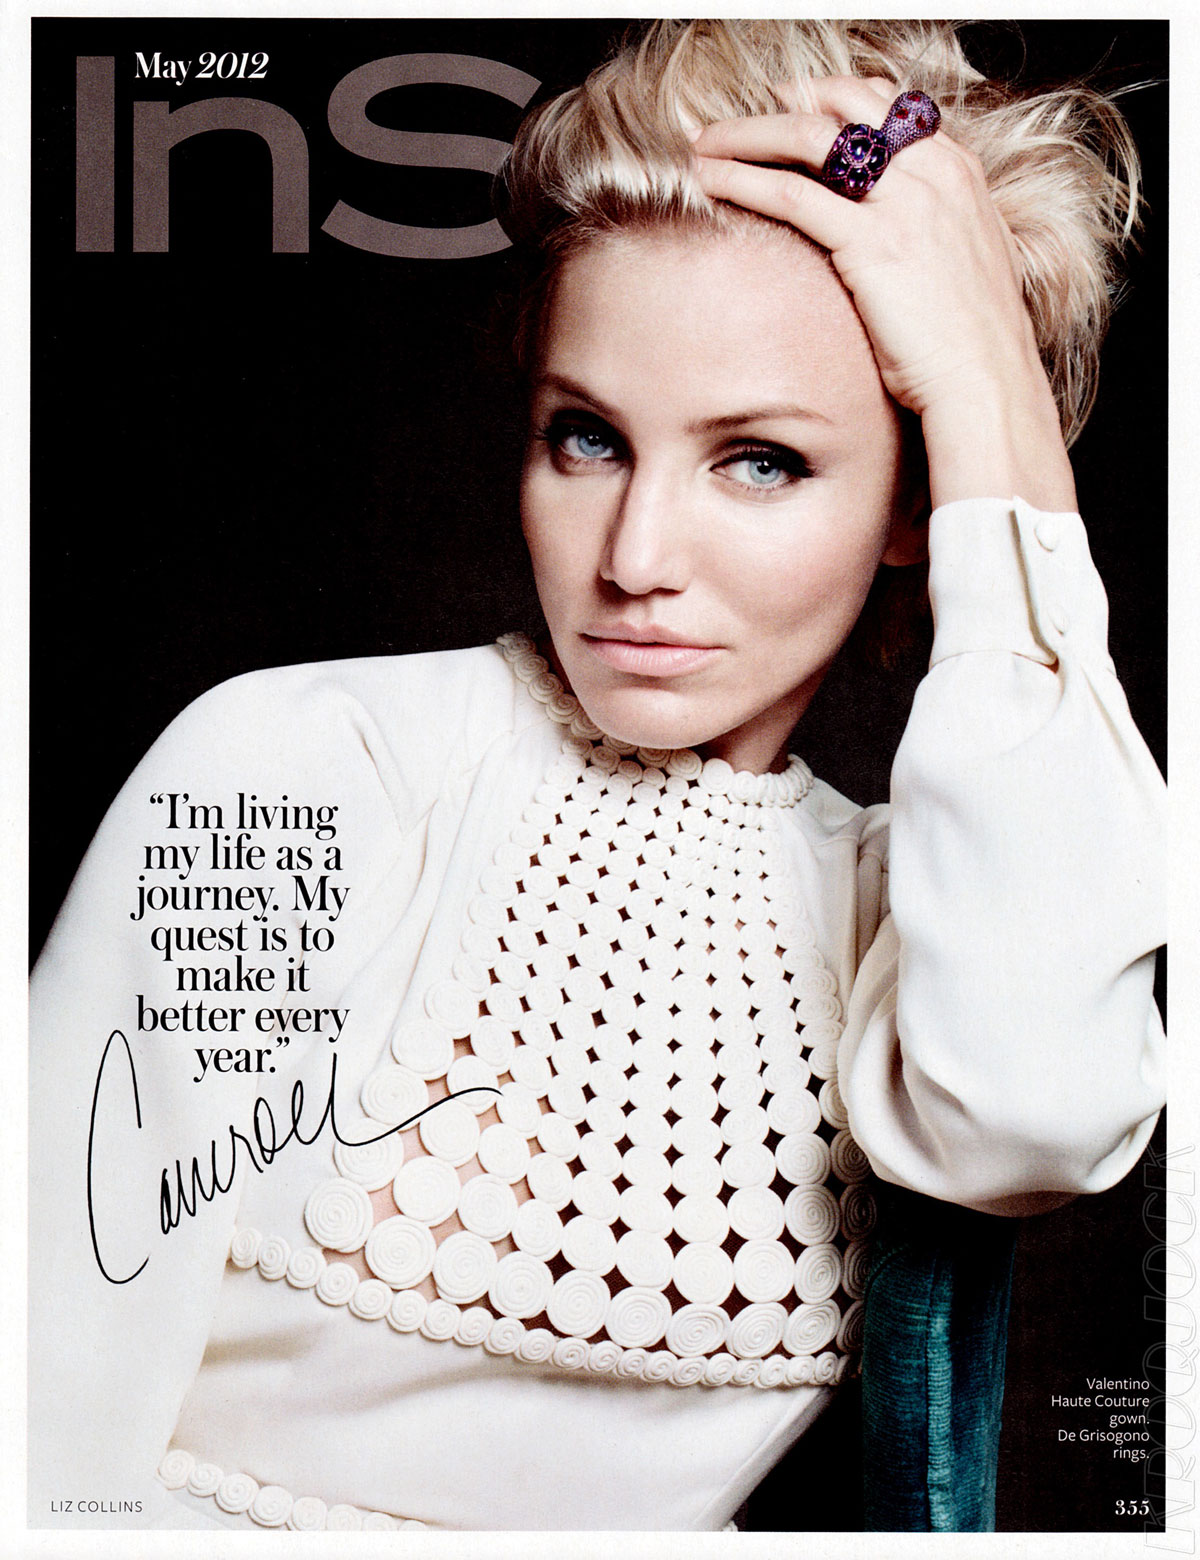 CAMERON DIAZ in InStyle Magazine May 2012 Issue 9